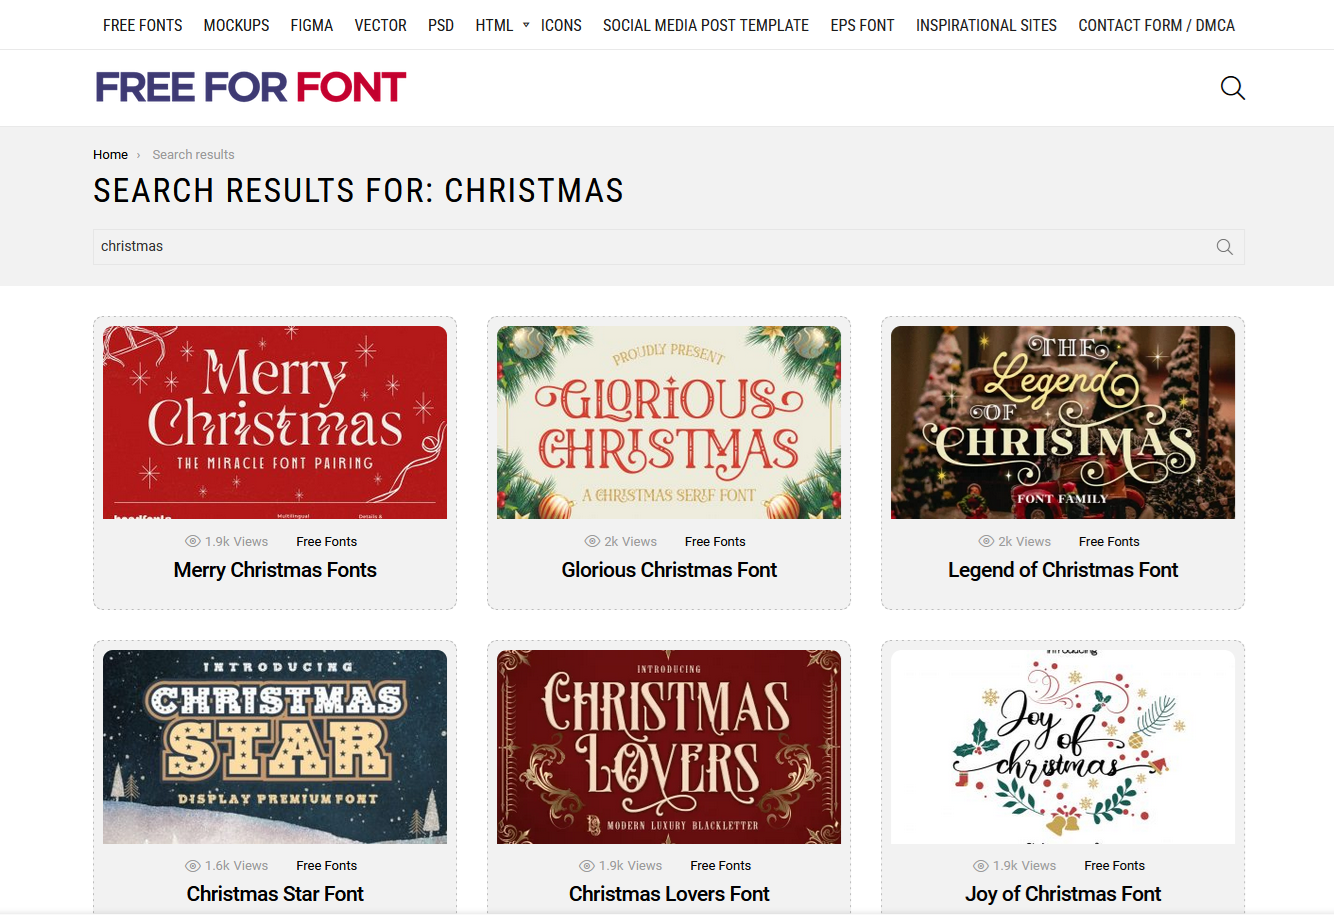 Screenshot of the search results for “Christmas” on the Free for Fonts website